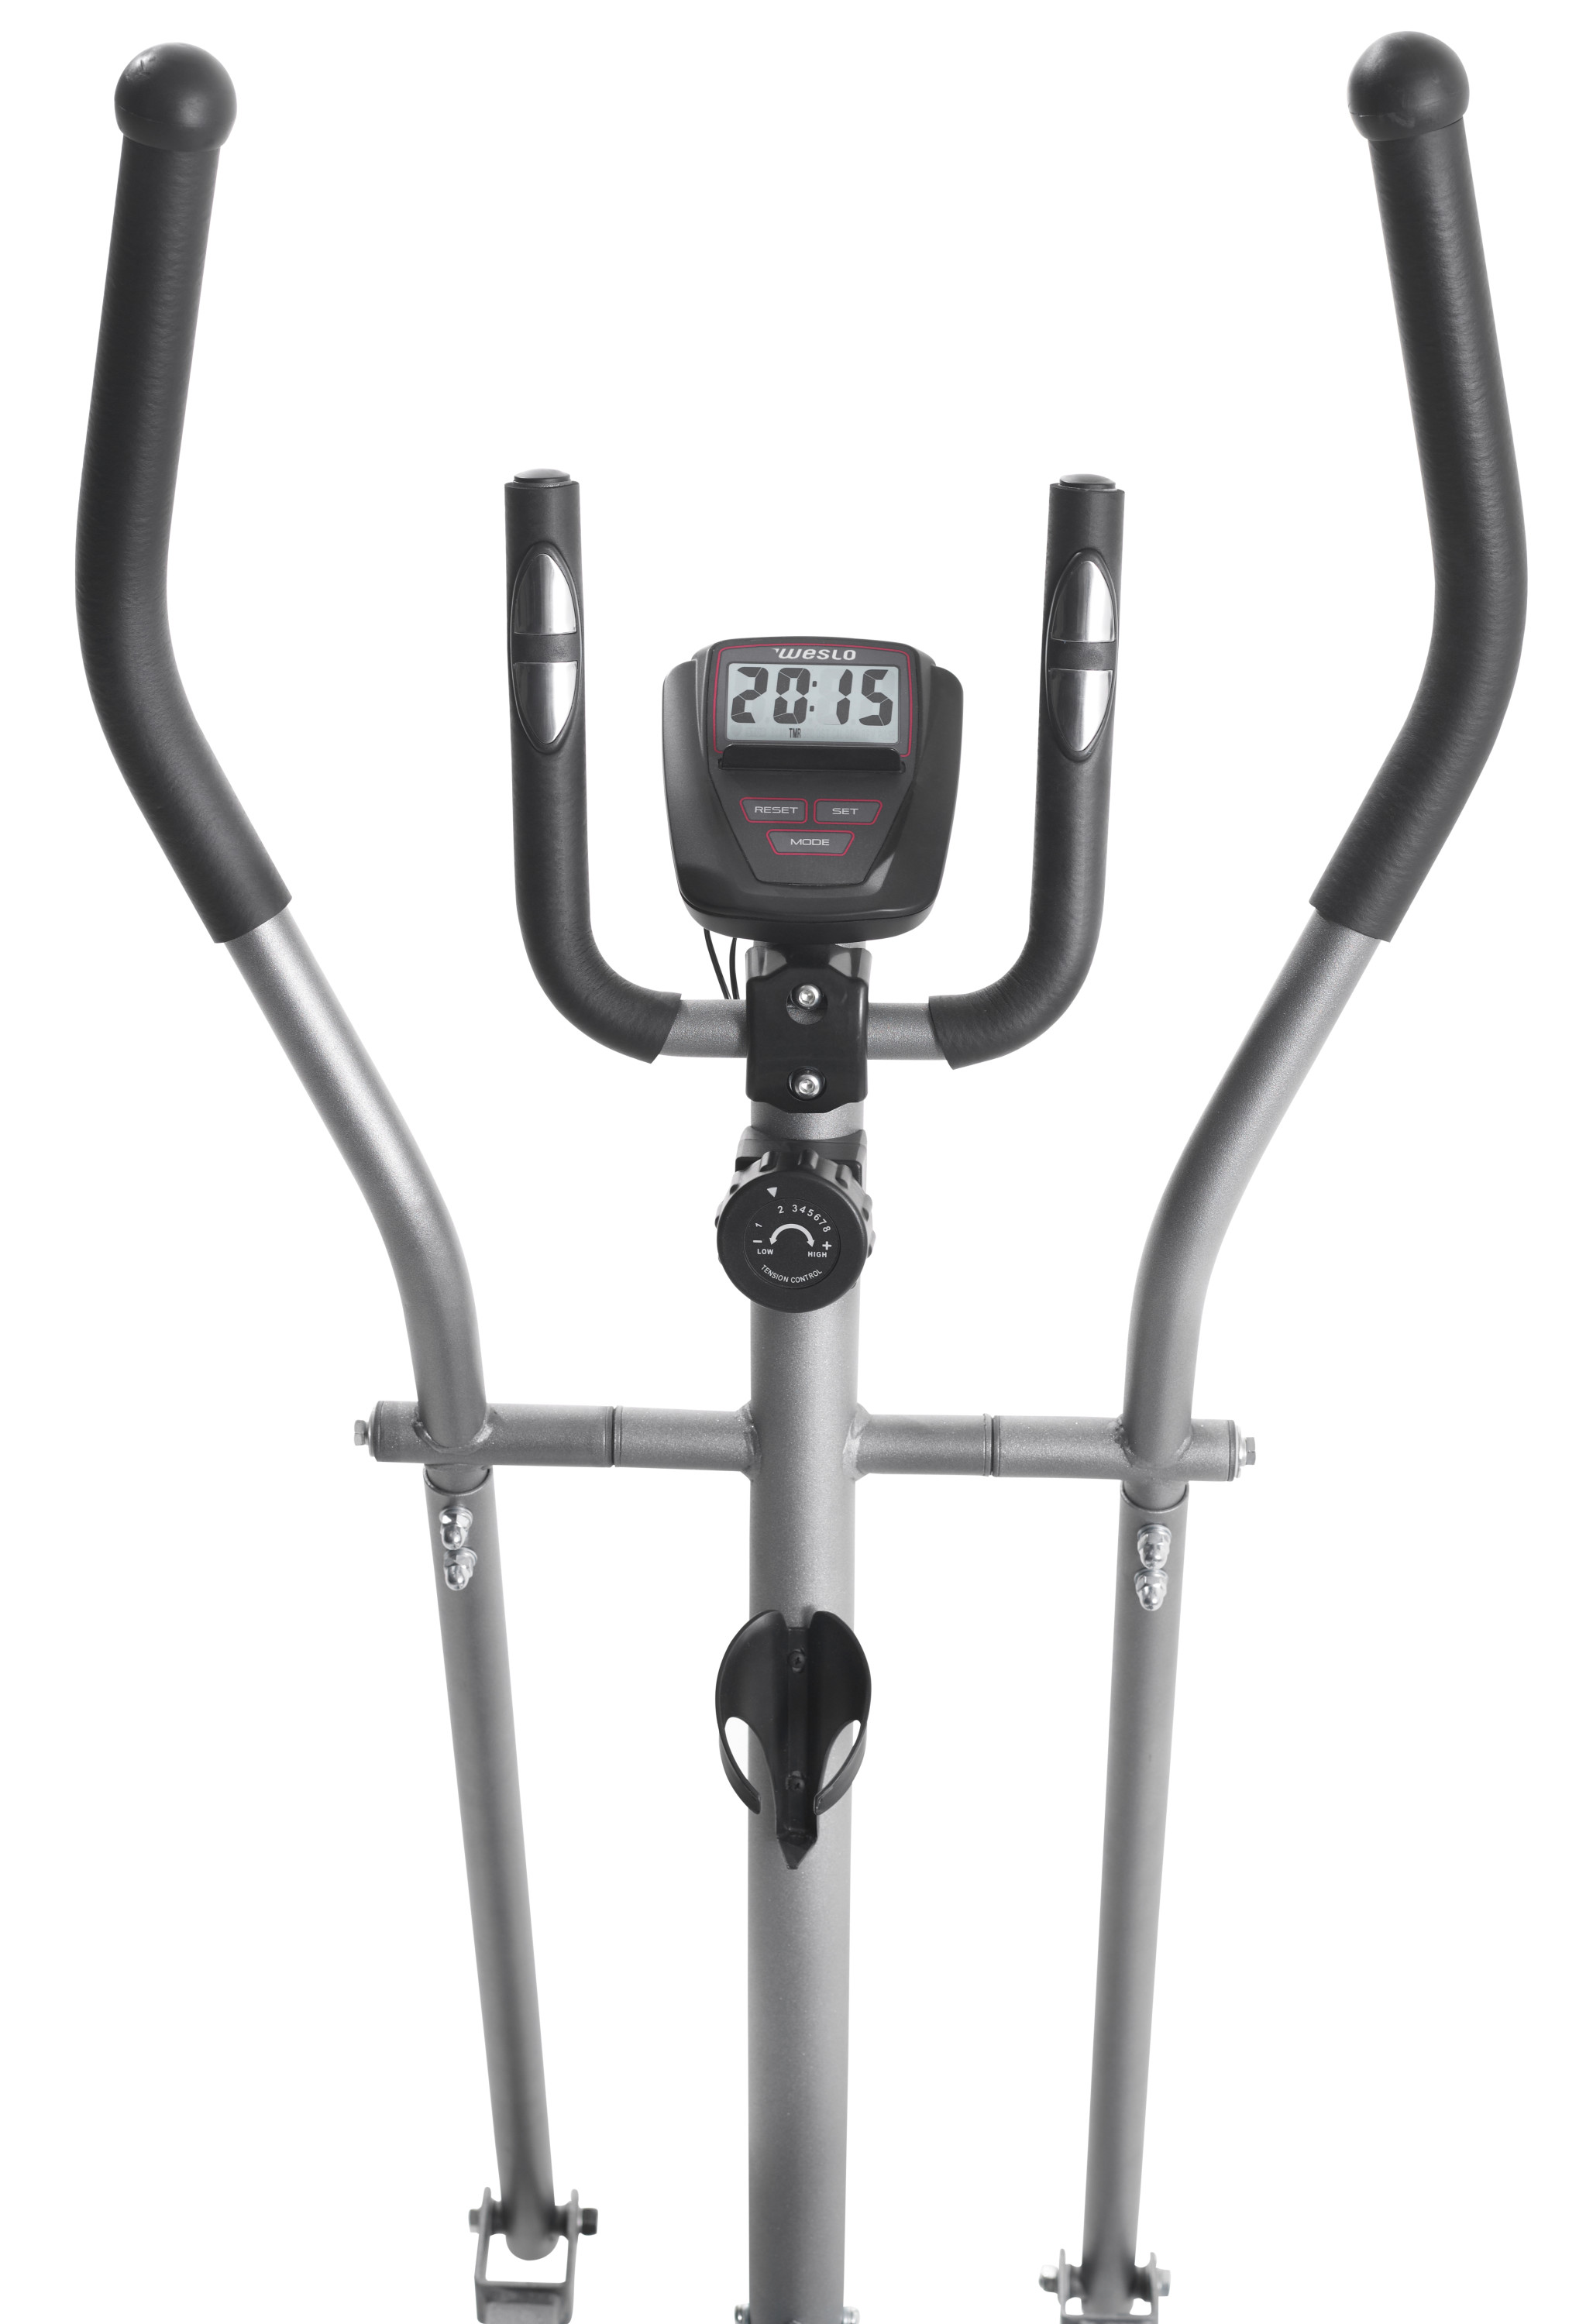 Weslo Momentum G 3.2 Bike and Elliptical Hybrid Trainer with LCD Window Display and 250 lb. Weight Capacity - image 5 of 14